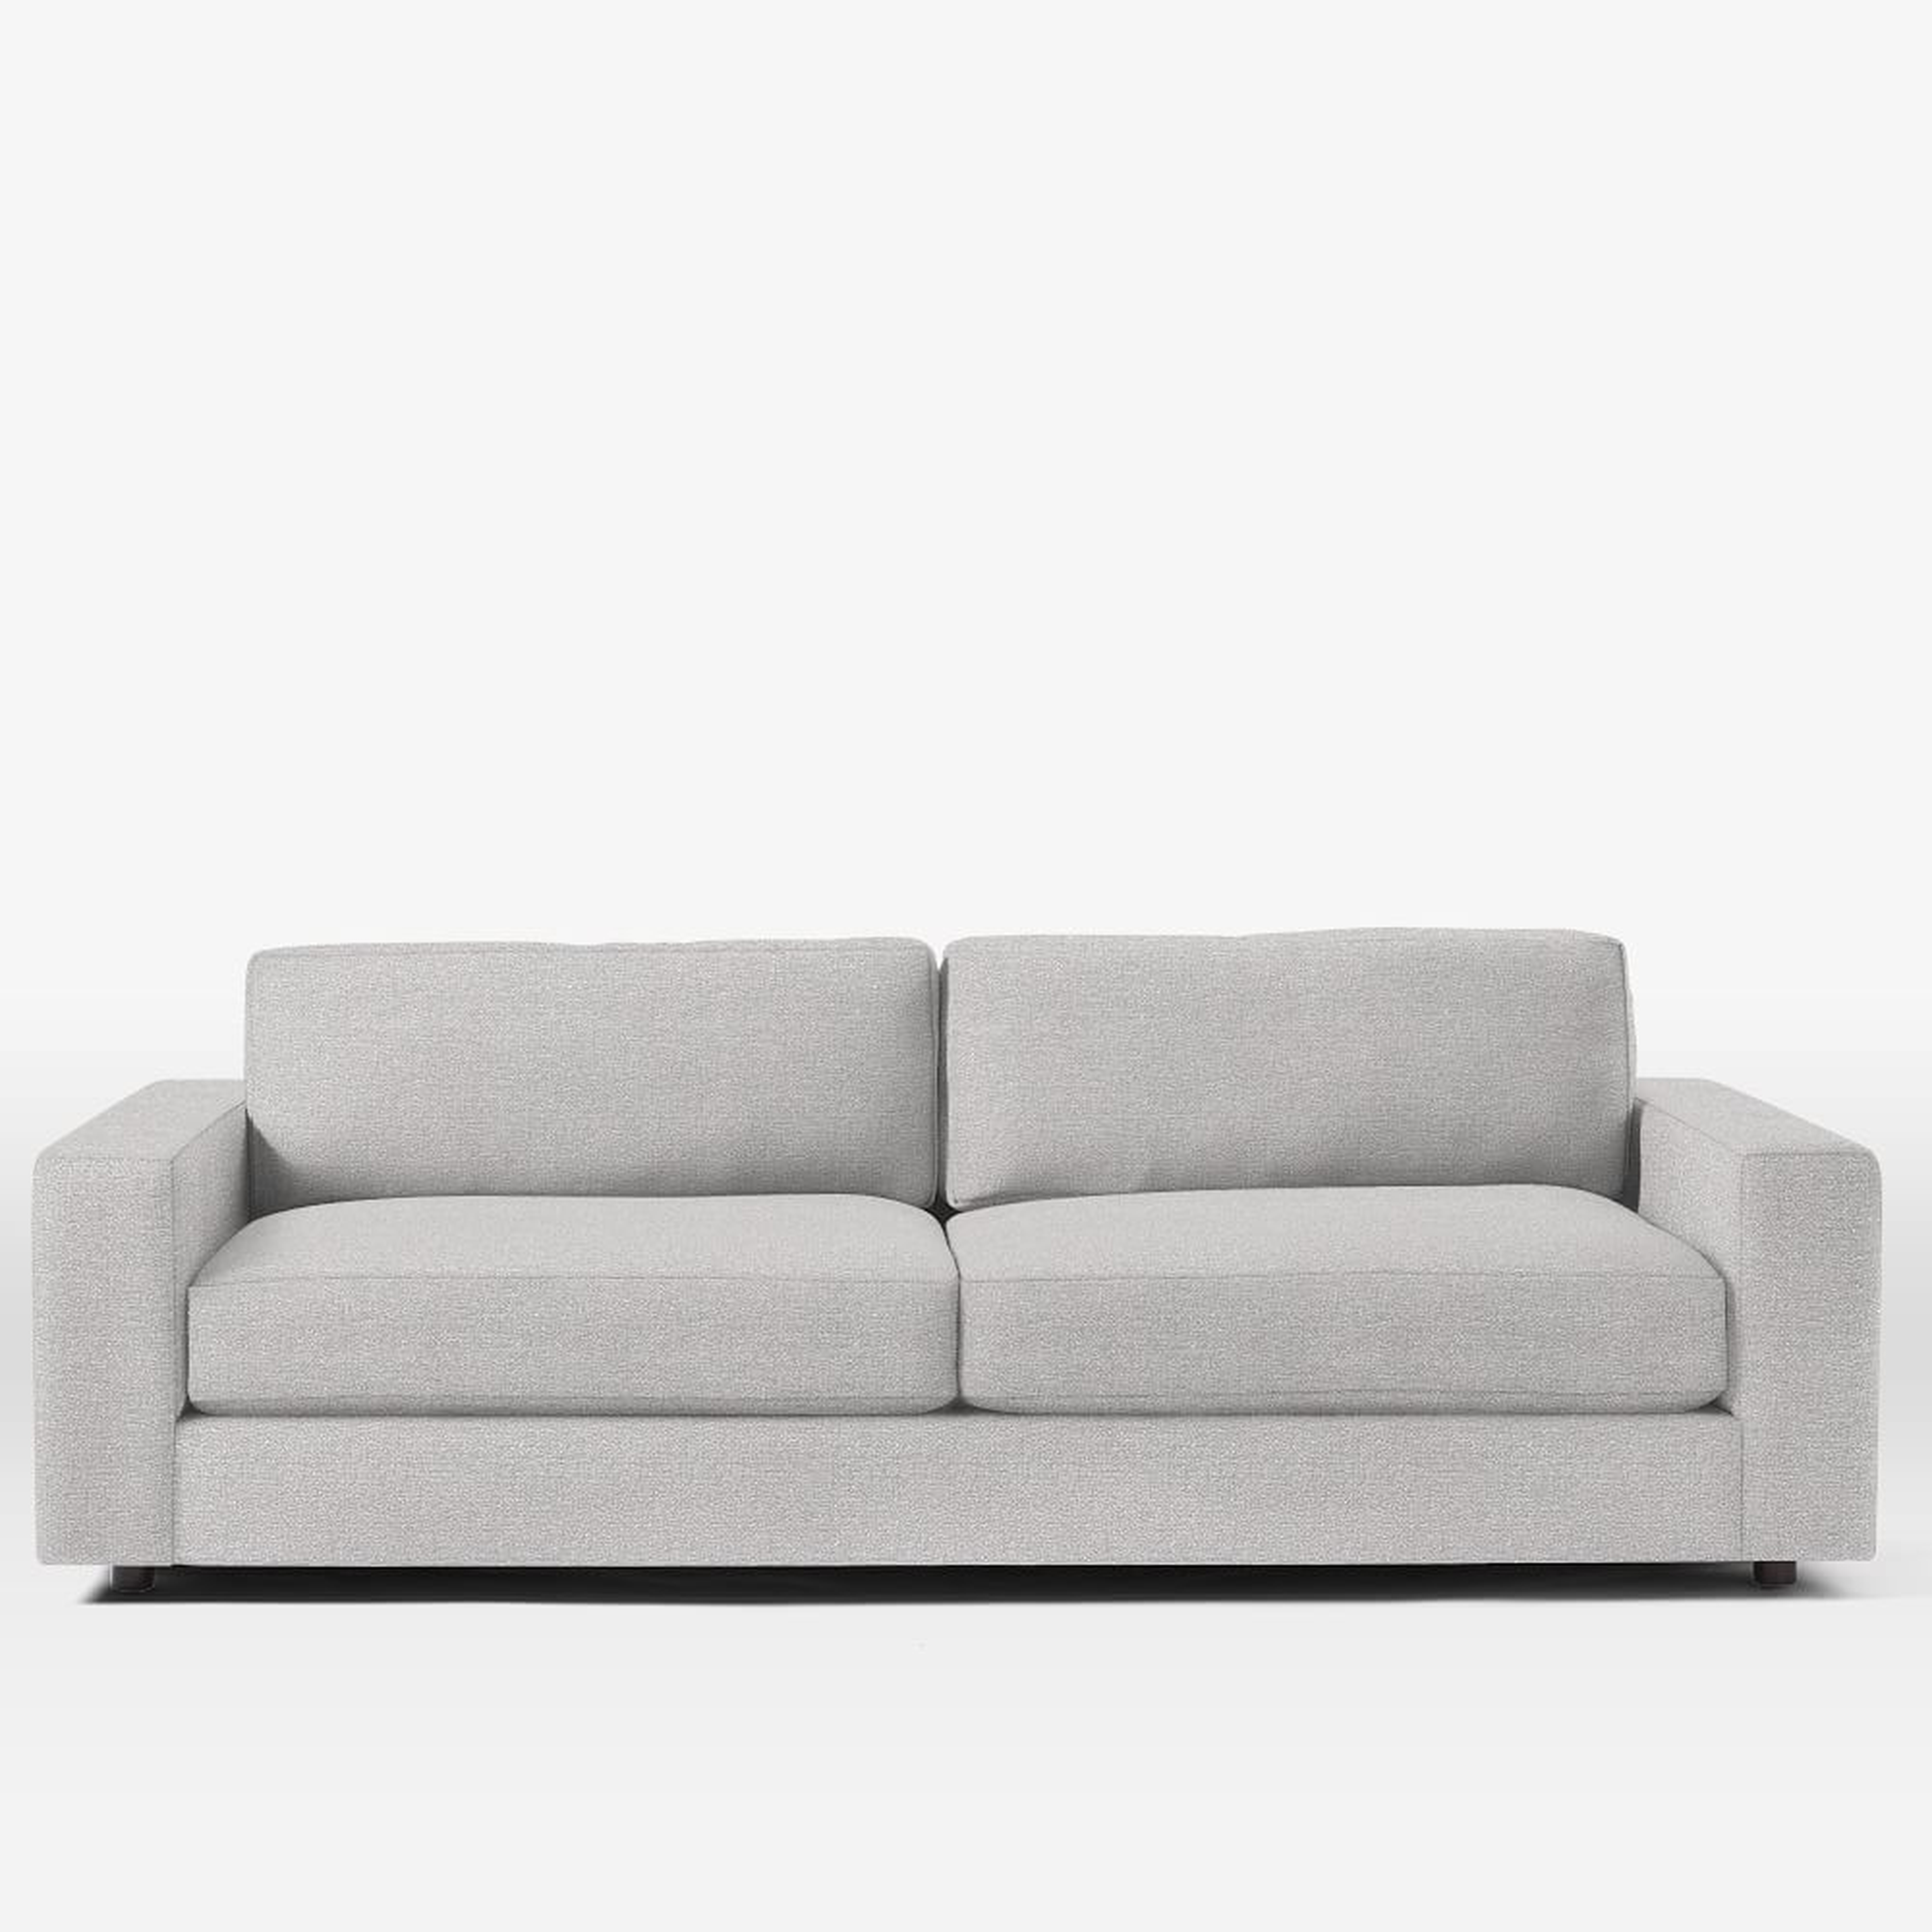 Urban 85" Sofa, Down Blend Fill, Chenille Tweed, Frost Gray - West Elm